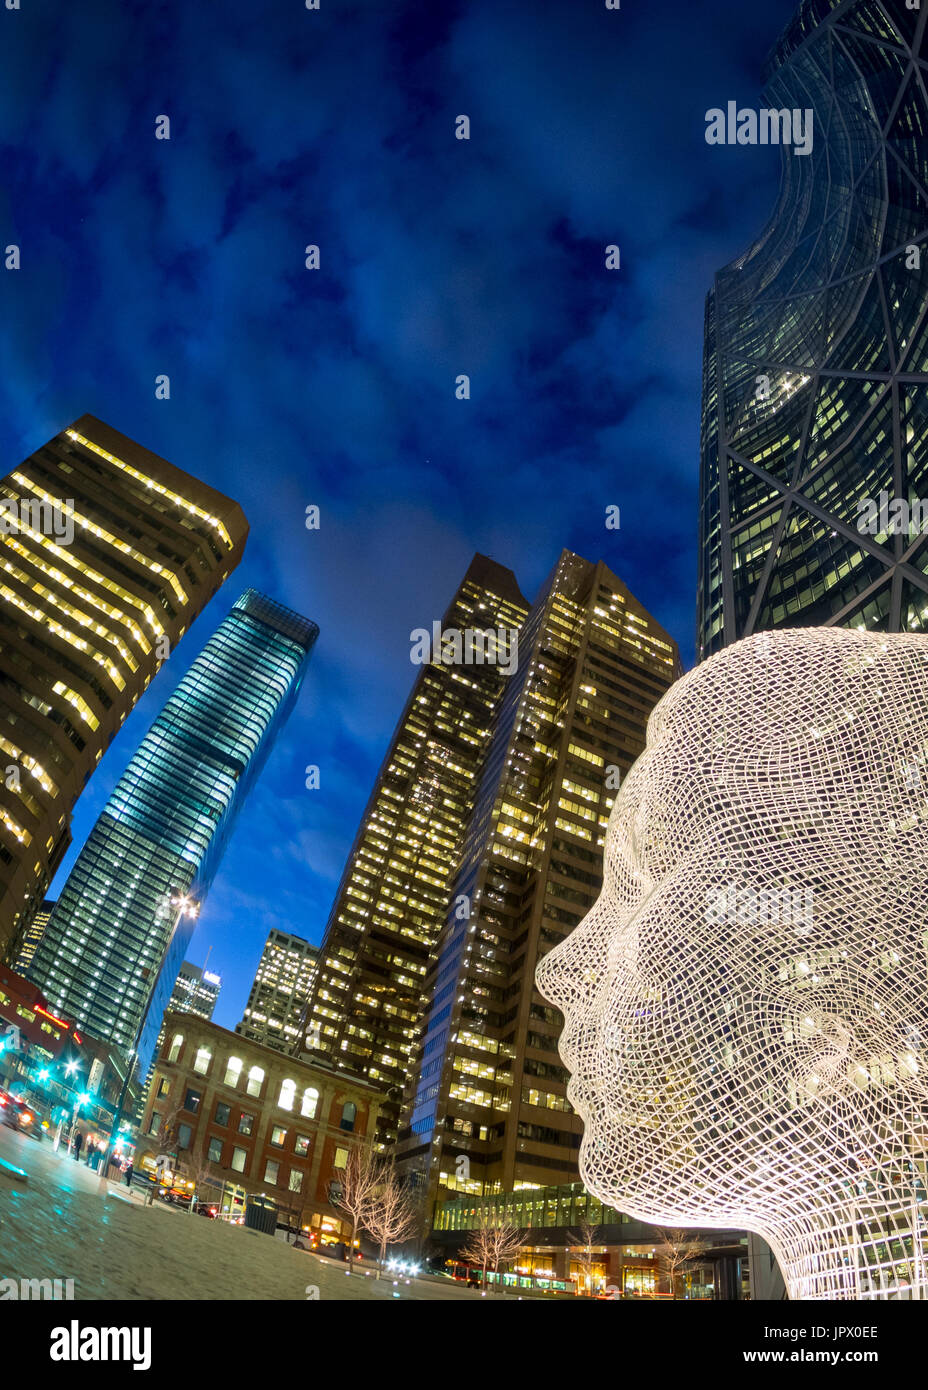 A night, fisheye view of the sculpture Wonderland by Jaume Plensa, in front of The Bow skyscraper in Calgary, Alberta, Canada. Stock Photo